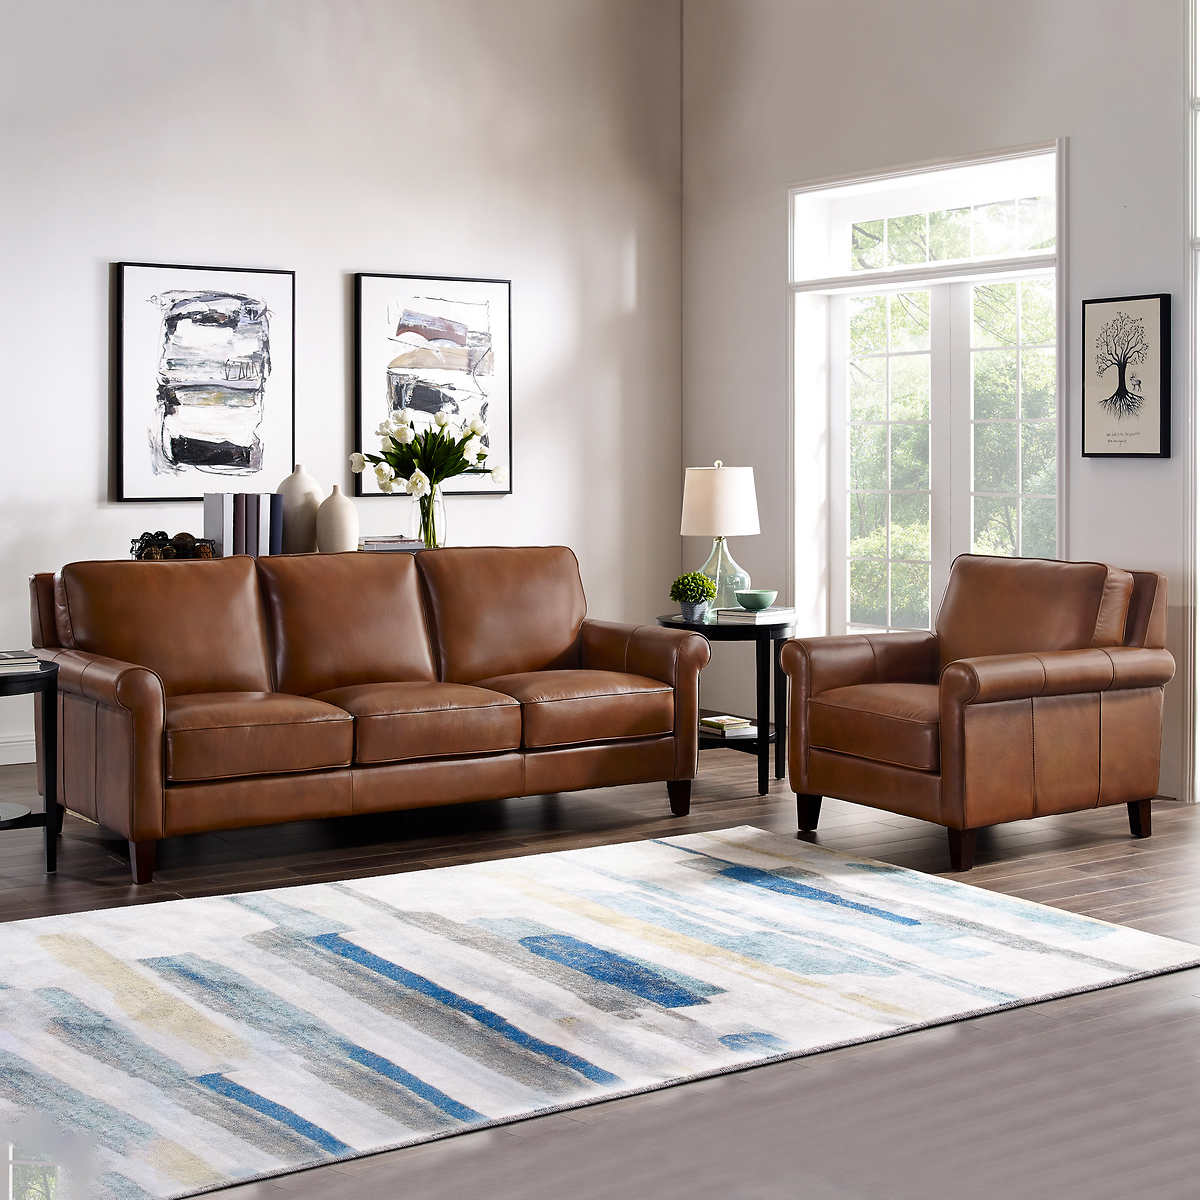 Ln 2 Piece Top Grain Leather Set, Costco Leather Couch Set